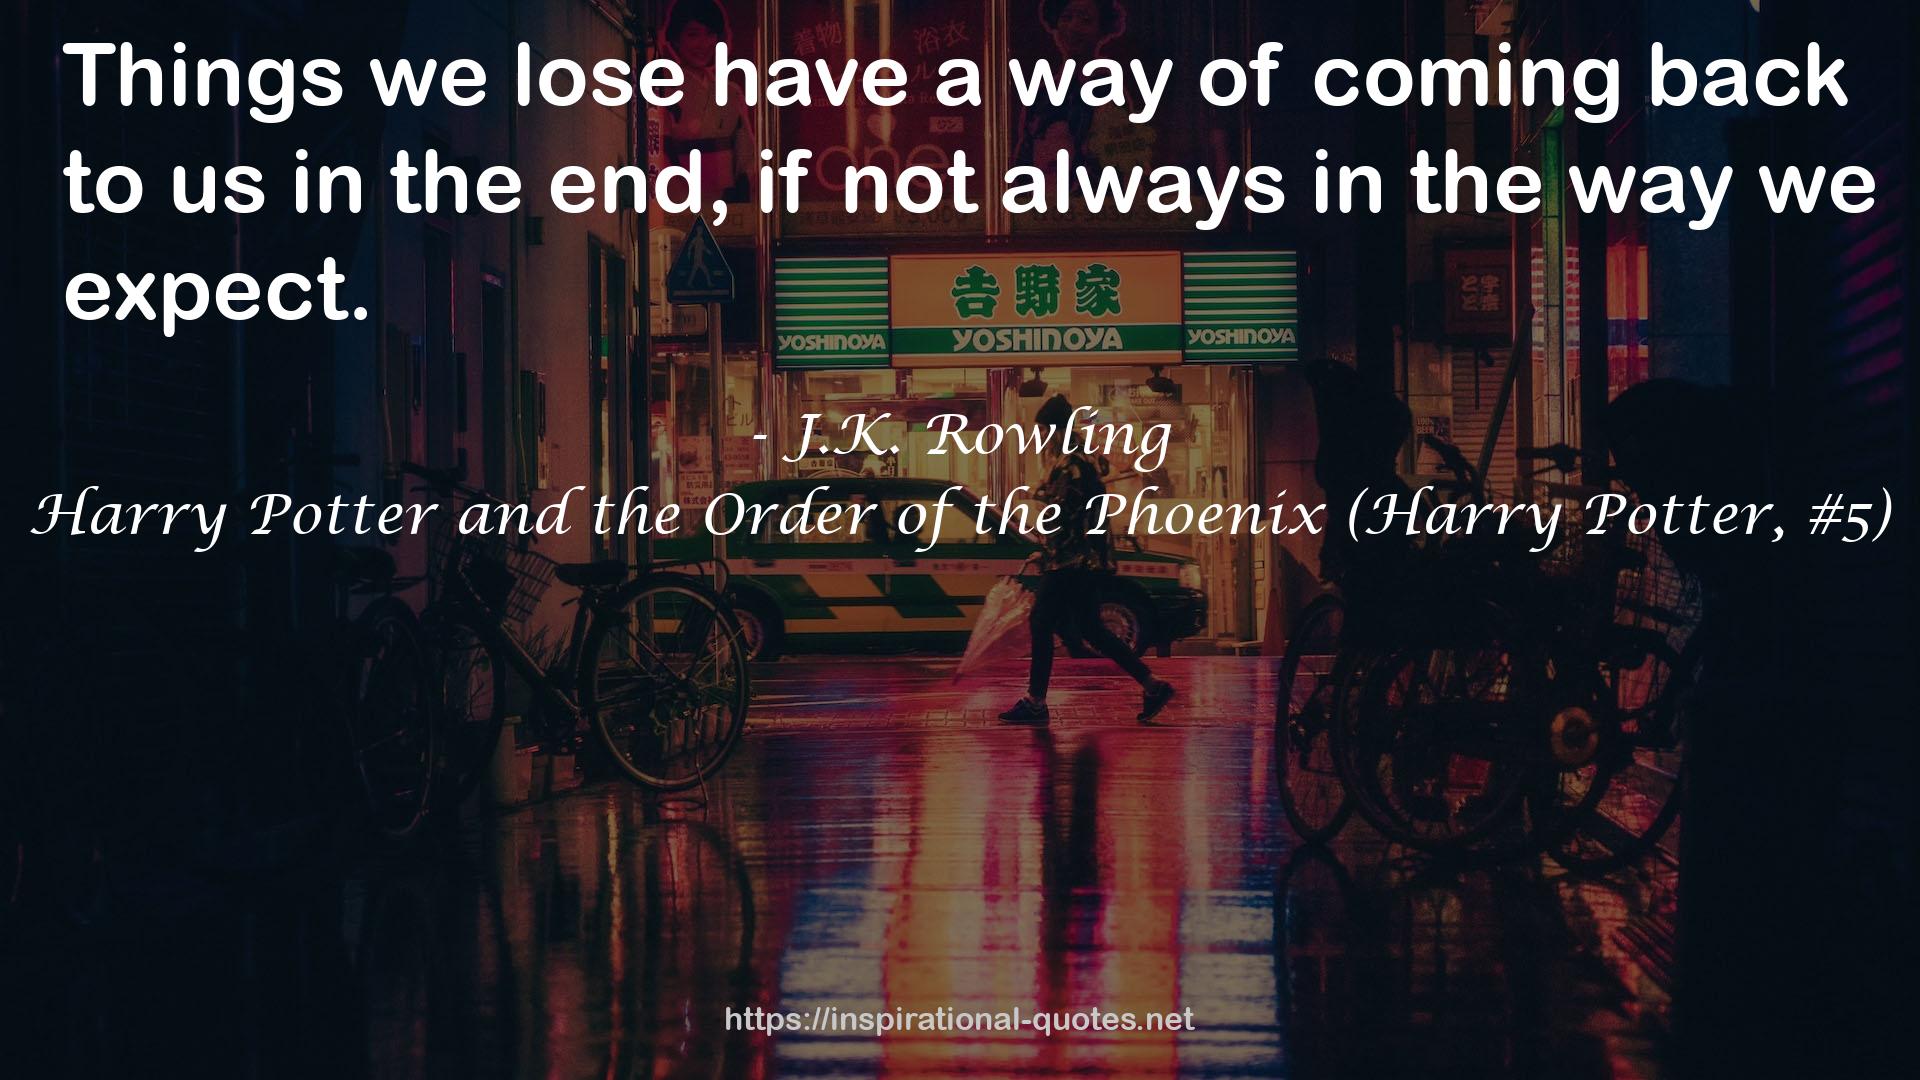 Harry Potter and the Order of the Phoenix (Harry Potter, #5) QUOTES